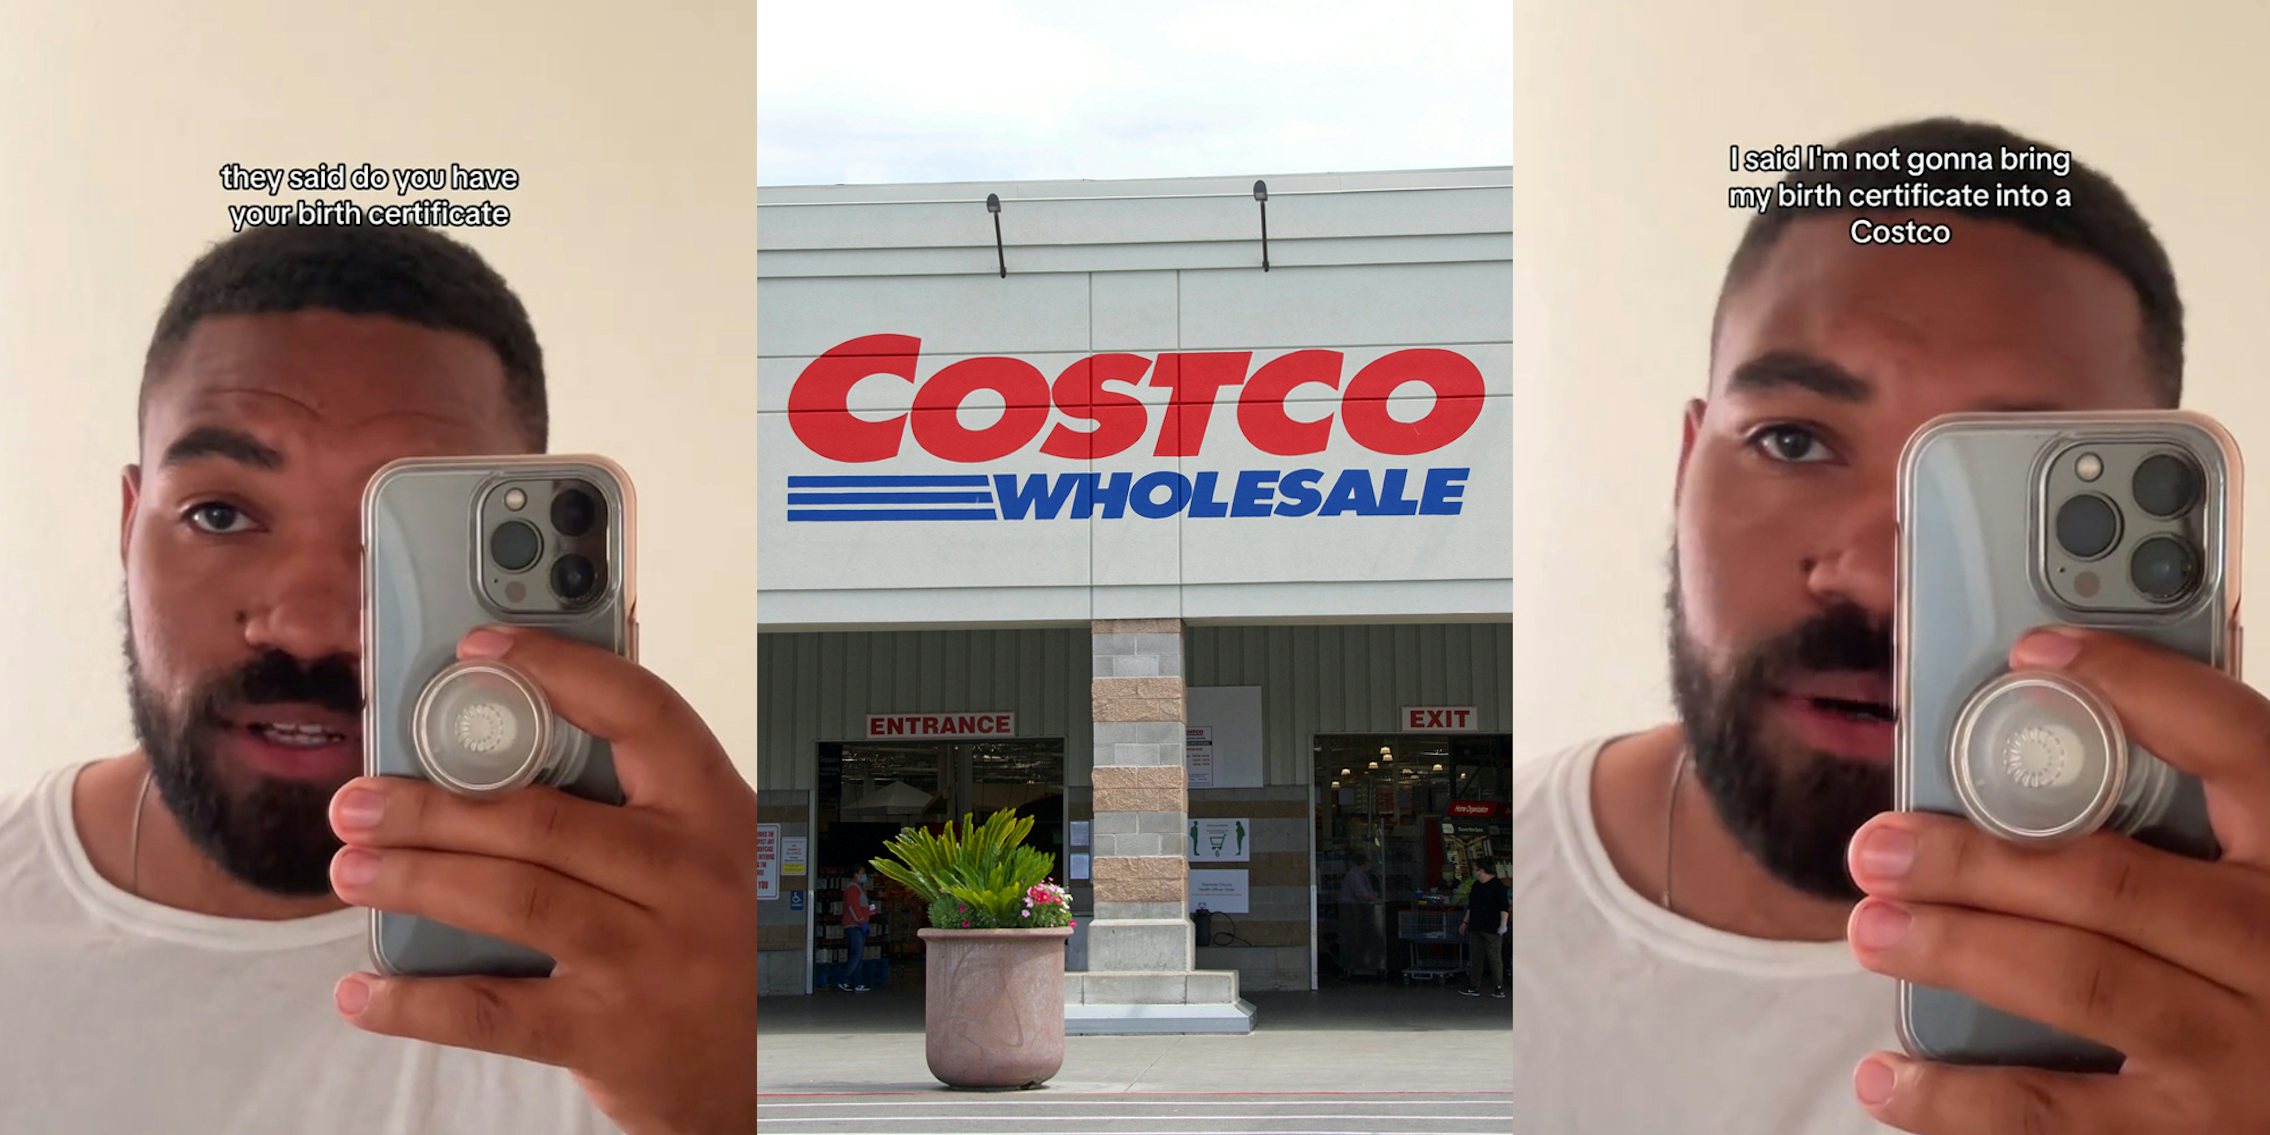 Costco customer speaking 'they said do you have your birth certificate' (l) Costco building with sign (c) Costco customer speaking with caption 'I said I'm not gonna bring my birth certificate into a Costco' (r)